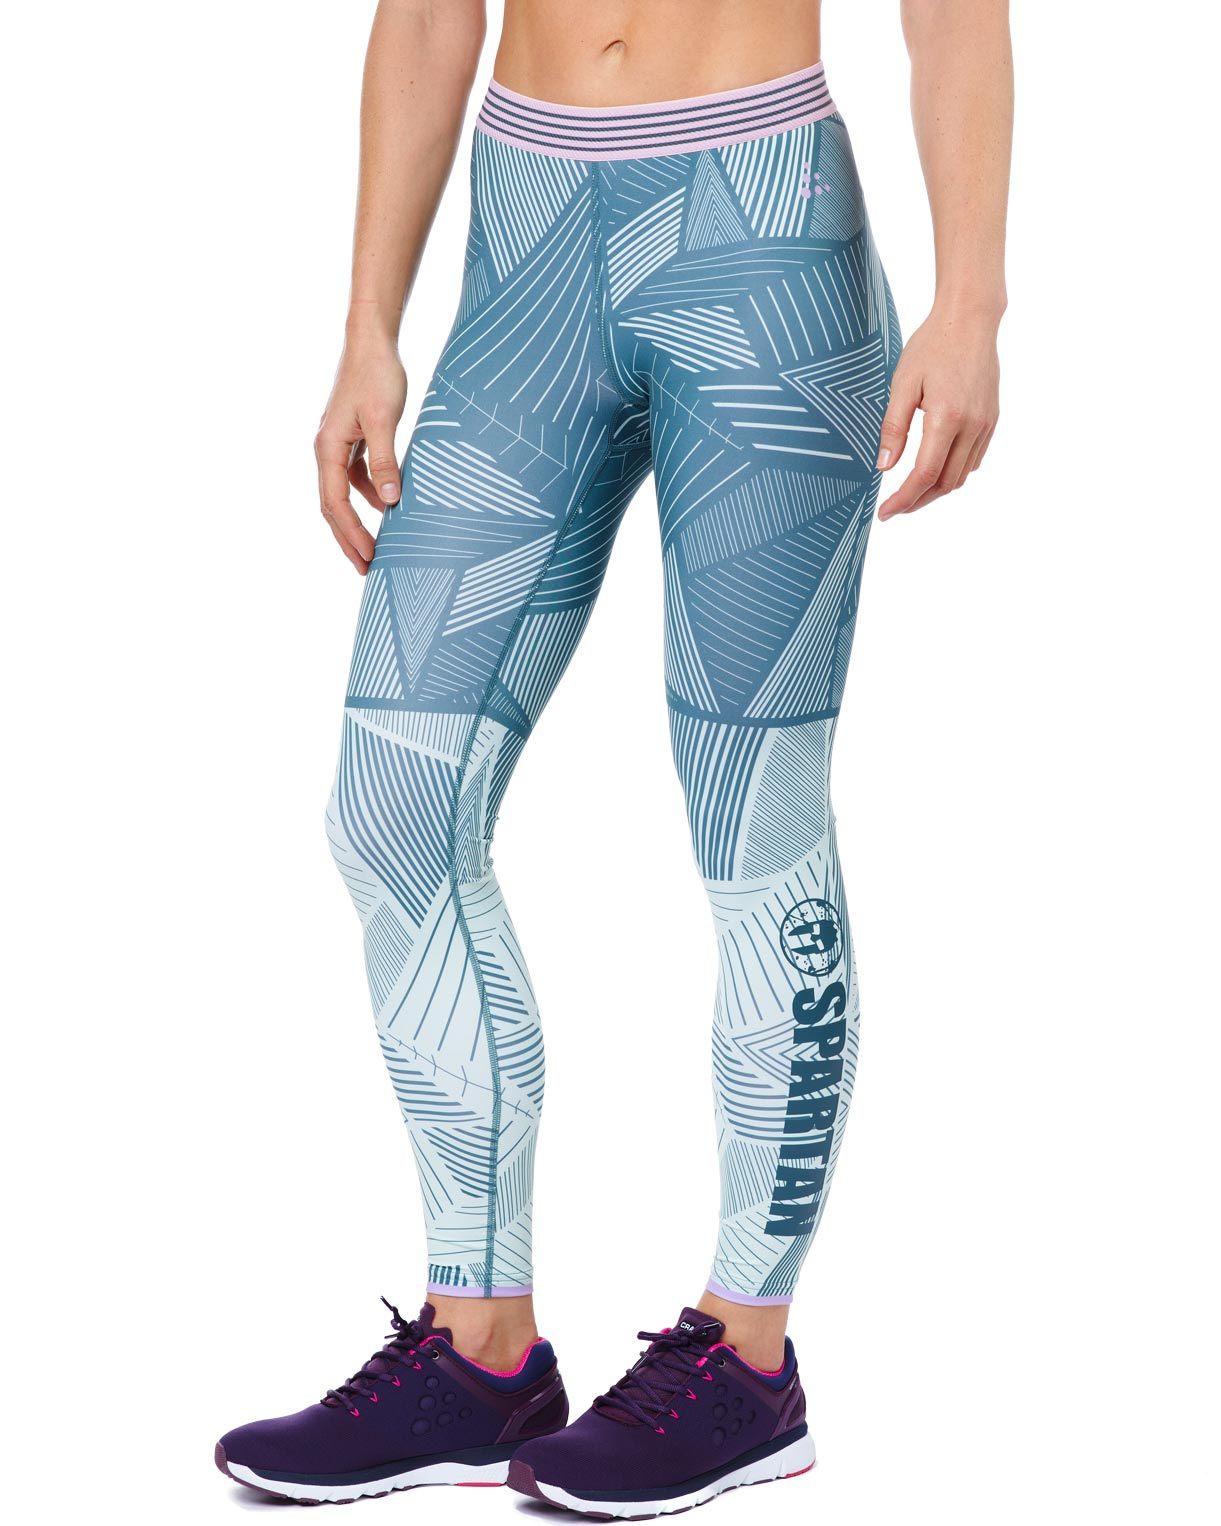 SPARTAN by CRAFT Lux Tight - Women's, Spartan Race